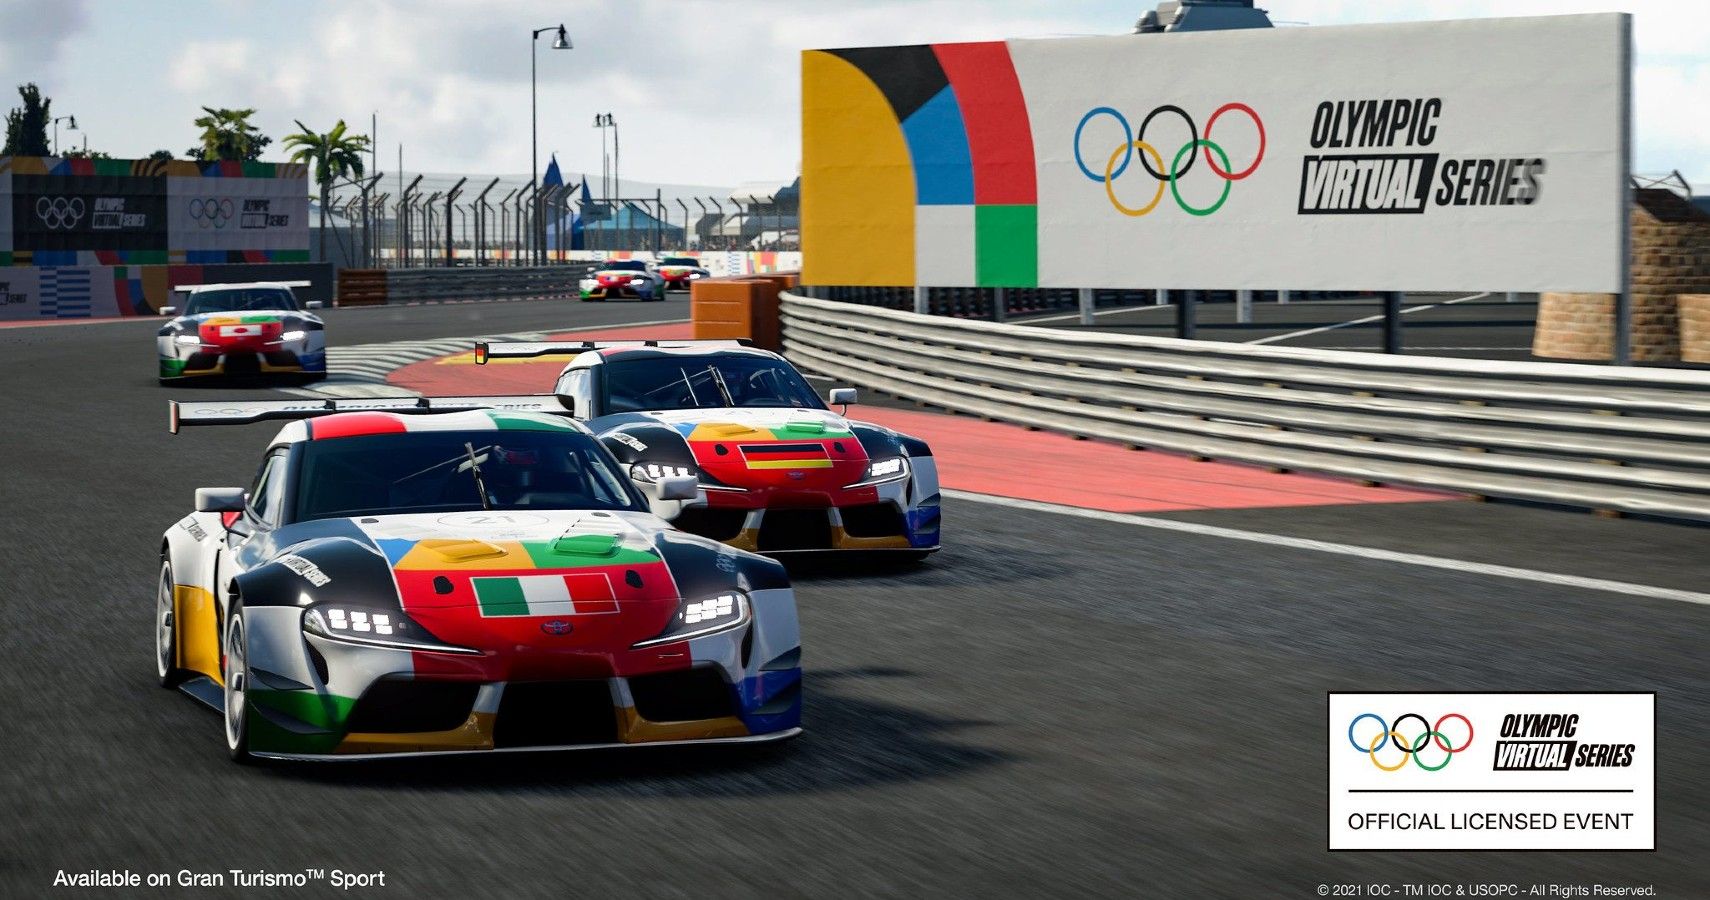 Gran Turismo Players Will Compete At FirstEver Olympic Virtual Series Motor Sport Event On June 23